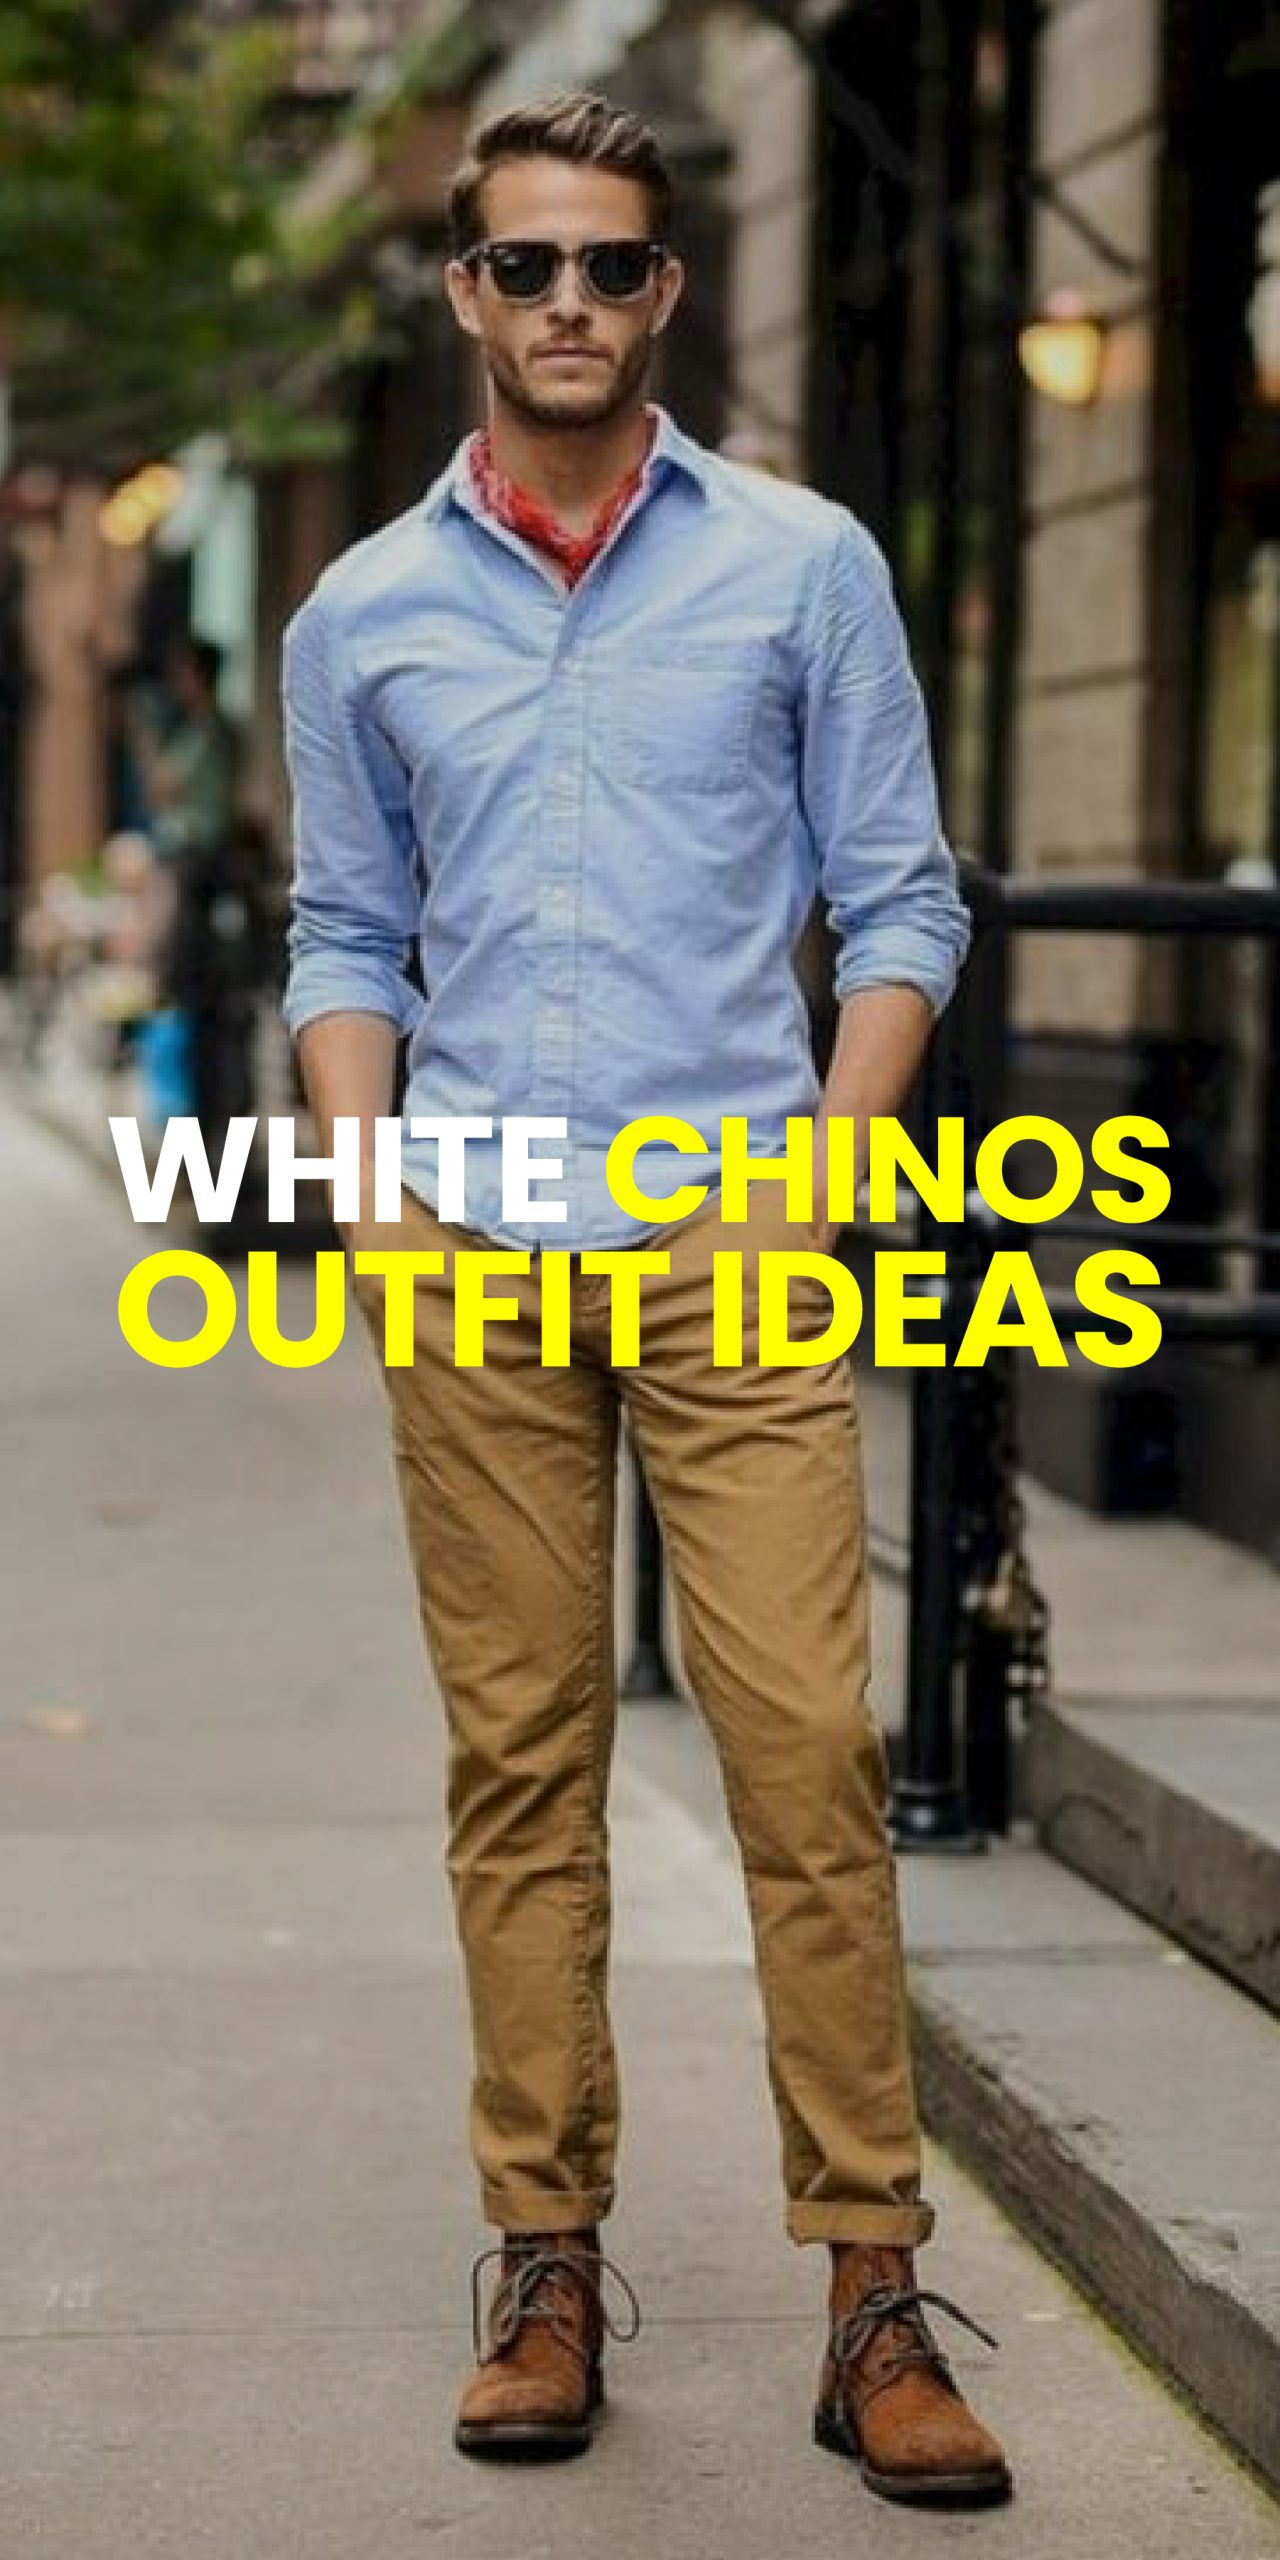 WHITE CHINOS OUTFIT IDEAS